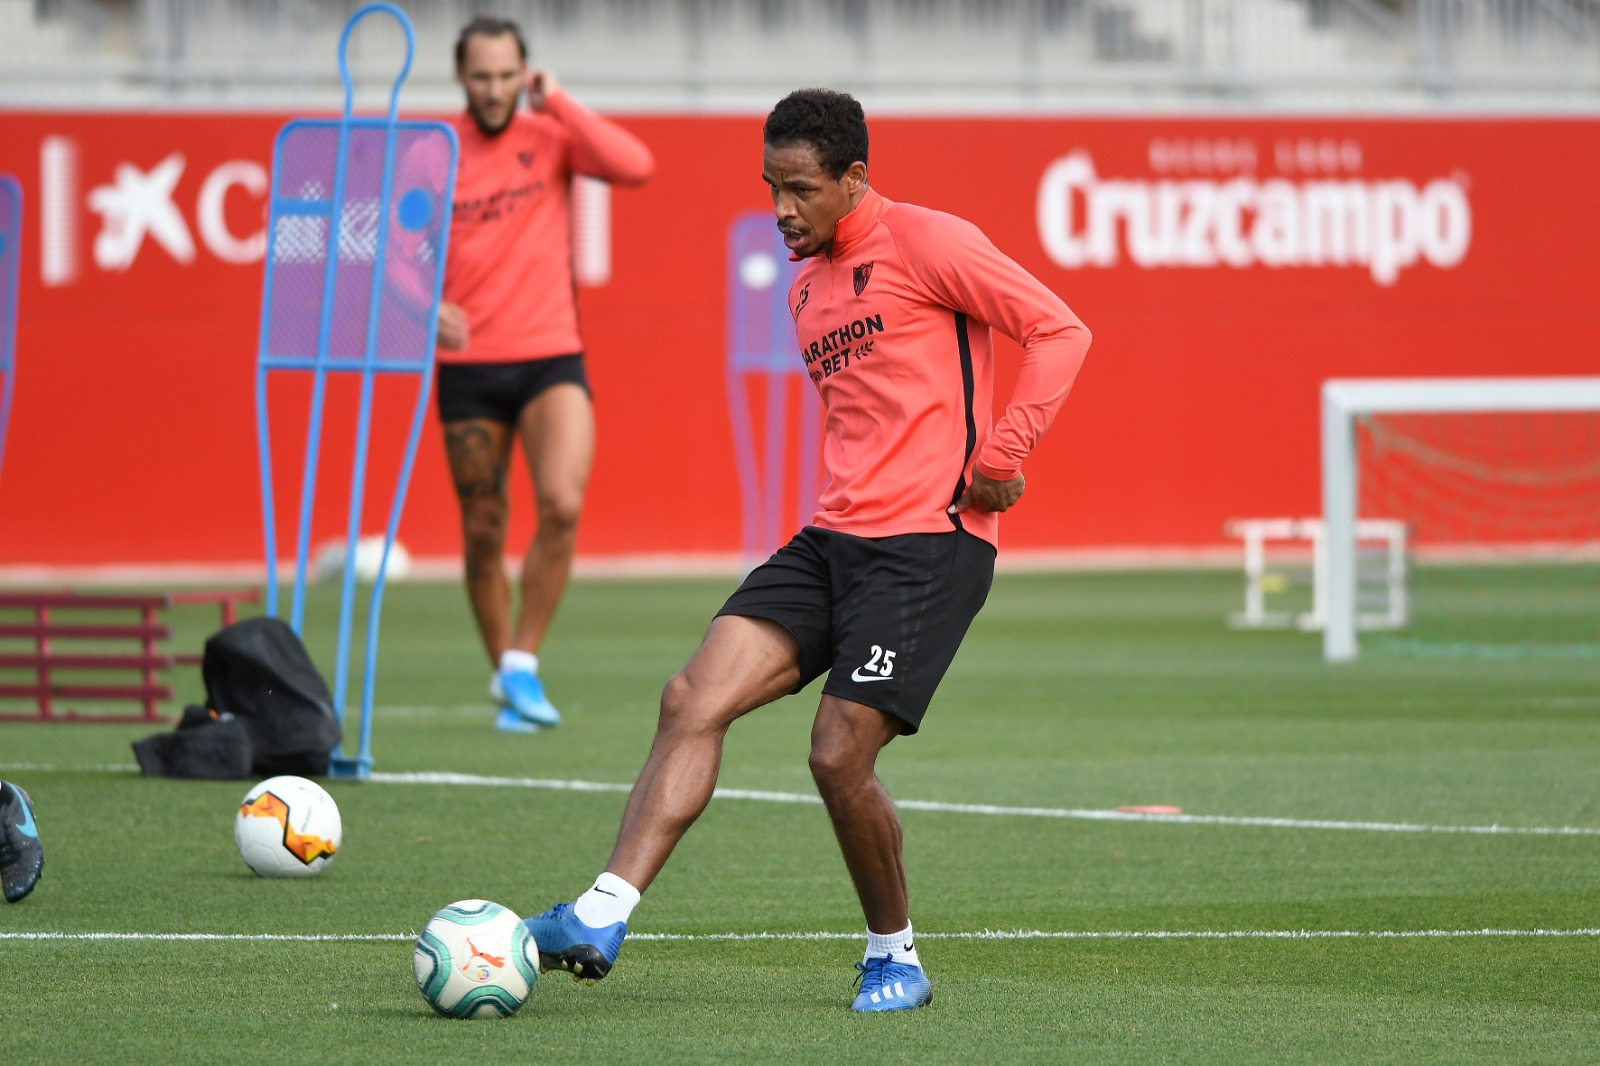 Fernando during a training session, Sunday 10th May